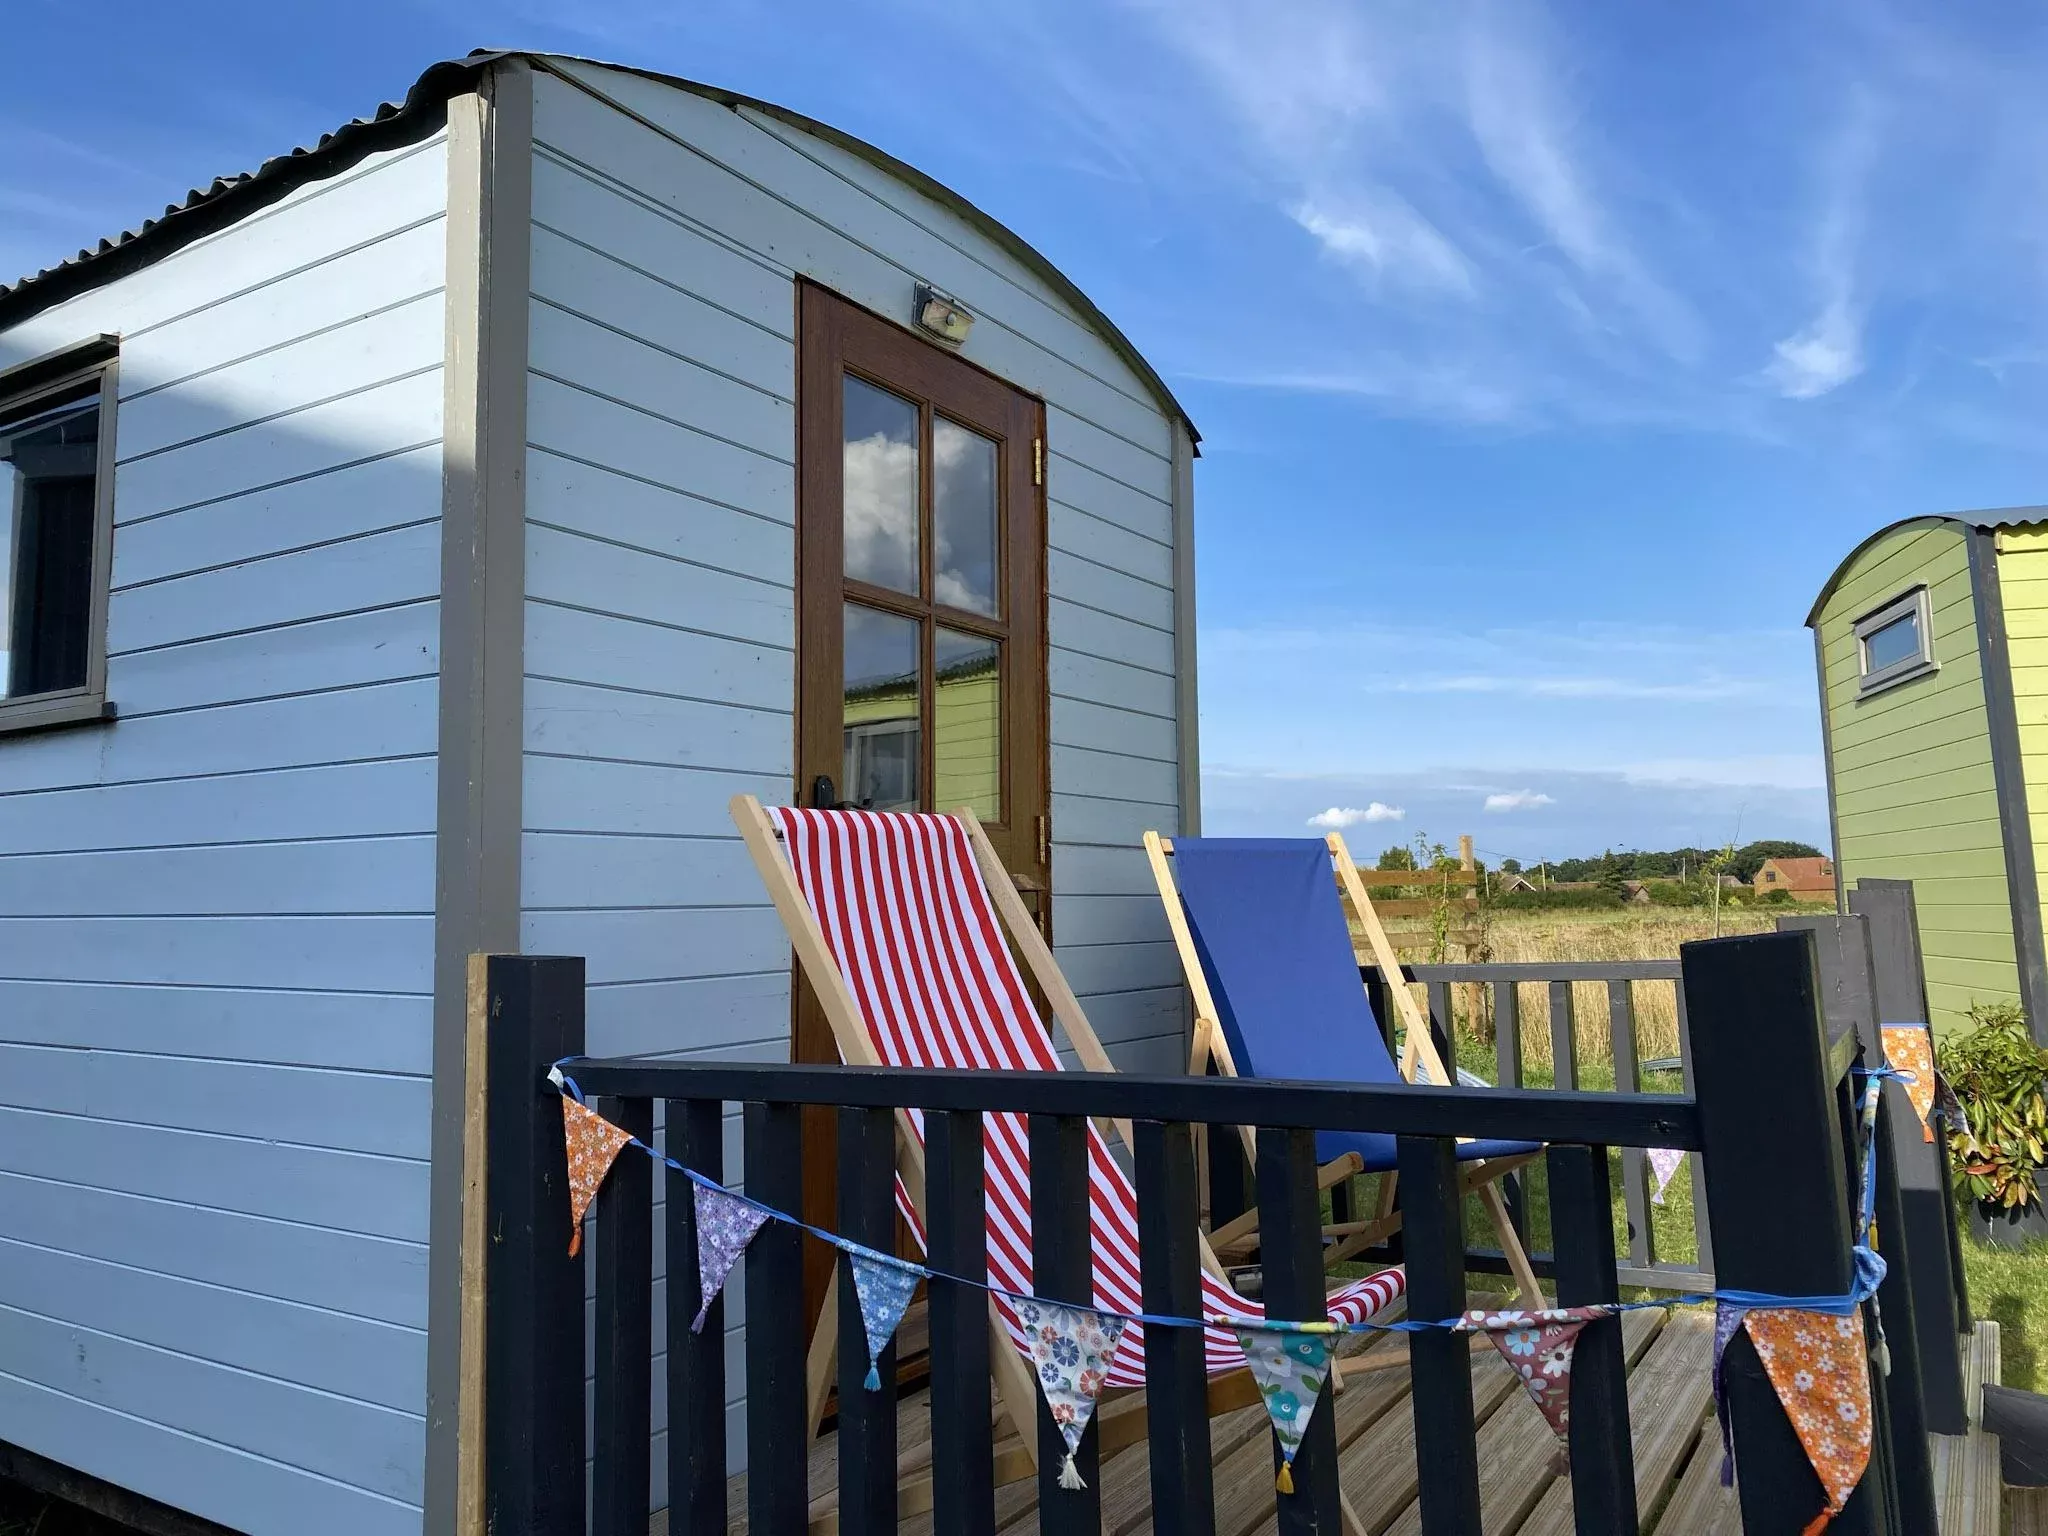 shepherds hut with two deck chairs under a beautiful blue sky